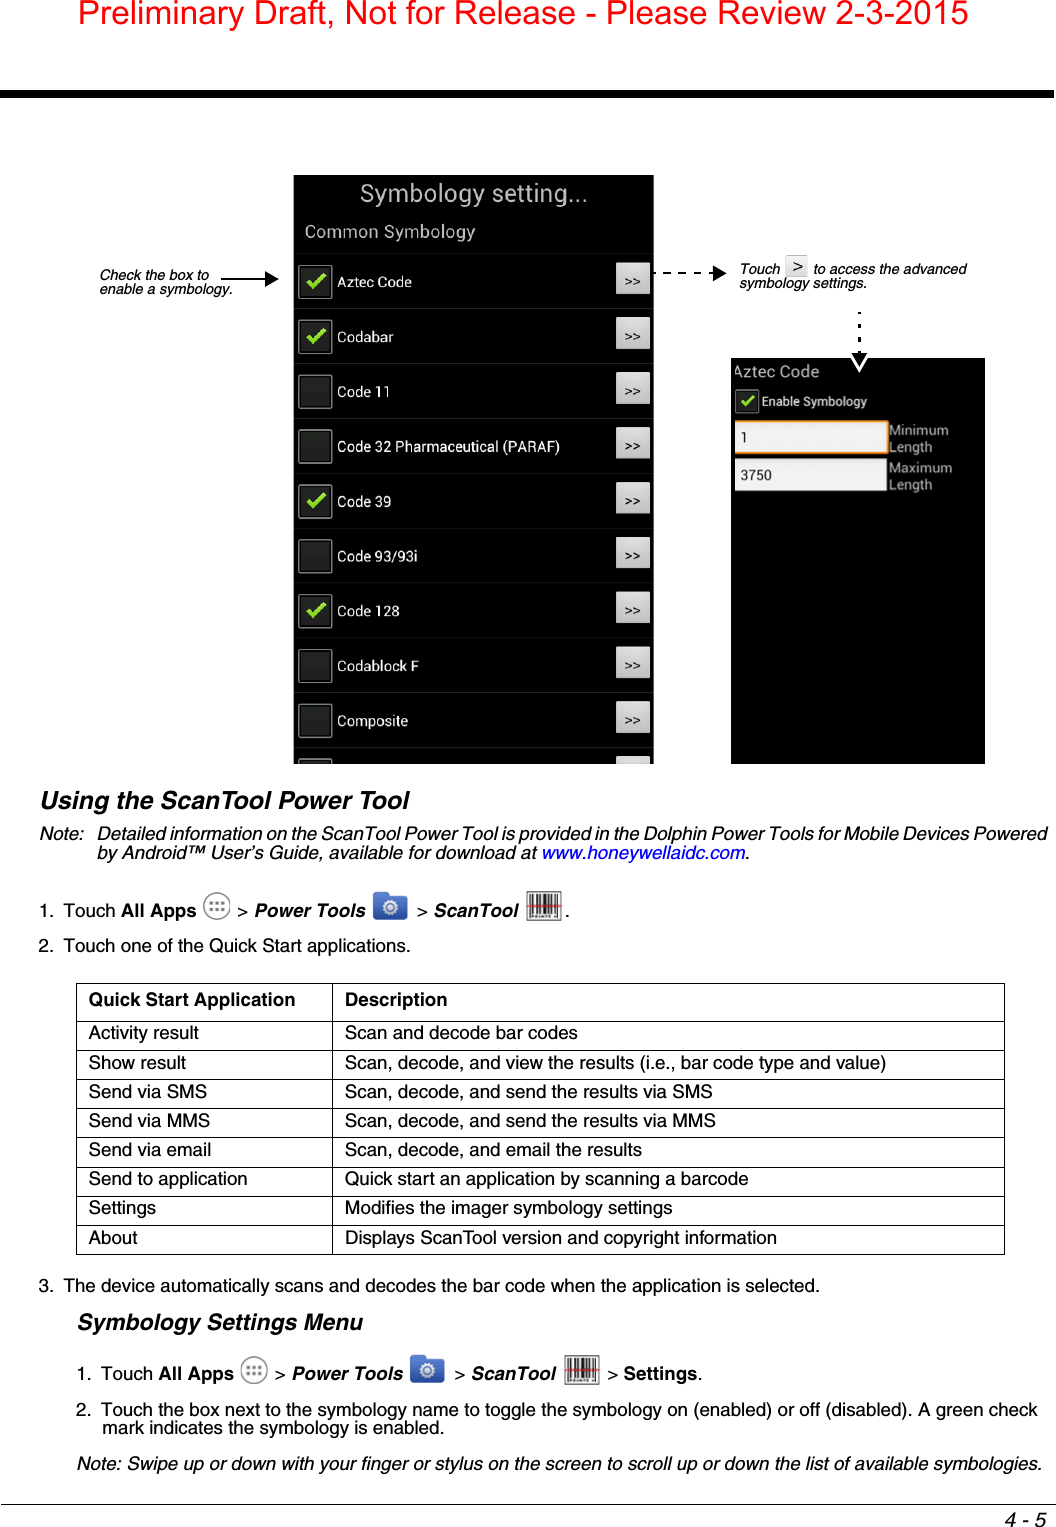 4 - 5Using the ScanTool Power ToolNote: Detailed information on the ScanTool Power Tool is provided in the Dolphin Power Tools for Mobile Devices Powered by Android™ User’s Guide, available for download at www.honeywellaidc.com.1. Touch All Apps  &gt; Power Tools  &gt; ScanTool  .2. Touch one of the Quick Start applications.3. The device automatically scans and decodes the bar code when the application is selected.Symbology Settings Menu1. Touch All Apps  &gt; Power Tools  &gt; ScanTool   &gt; Settings.2. Touch the box next to the symbology name to toggle the symbology on (enabled) or off (disabled). A green check mark indicates the symbology is enabled.Note: Swipe up or down with your finger or stylus on the screen to scroll up or down the list of available symbologies.Quick Start Application DescriptionActivity result Scan and decode bar codesShow result Scan, decode, and view the results (i.e., bar code type and value)Send via SMS Scan, decode, and send the results via SMSSend via MMS Scan, decode, and send the results via MMSSend via email Scan, decode, and email the resultsSend to application Quick start an application by scanning a barcodeSettings Modifies the imager symbology settingsAbout Displays ScanTool version and copyright informationCheck the box to enable a symbology.Touch   to access the advanced symbology settings.Preliminary Draft, Not for Release - Please Review 2-3-2015